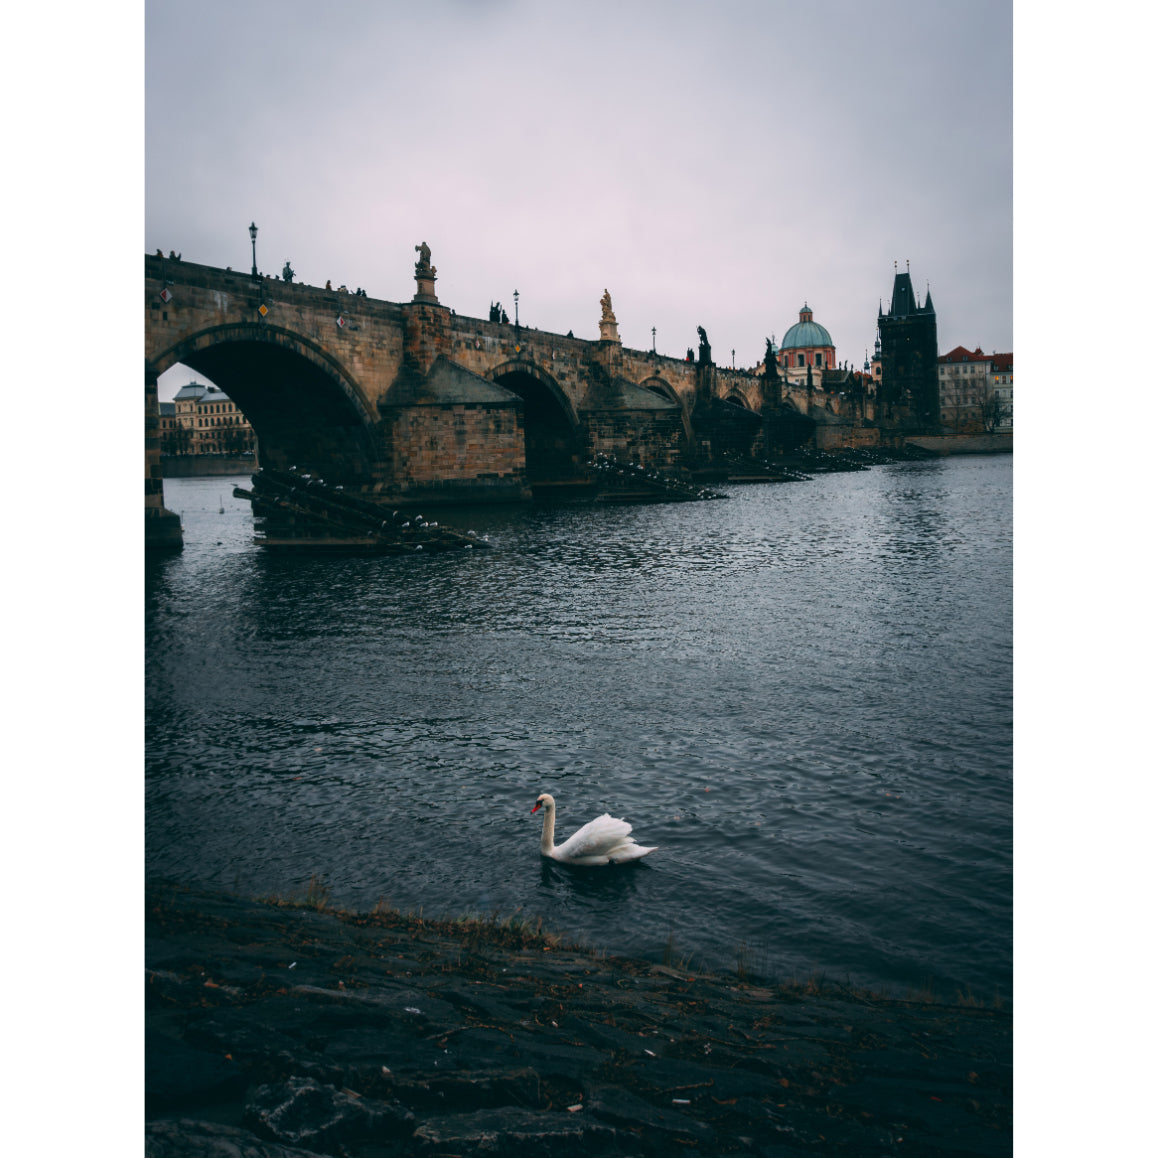 Glide with the Swan: The Majestic Charles Bridge of Prague | Acrylic Print